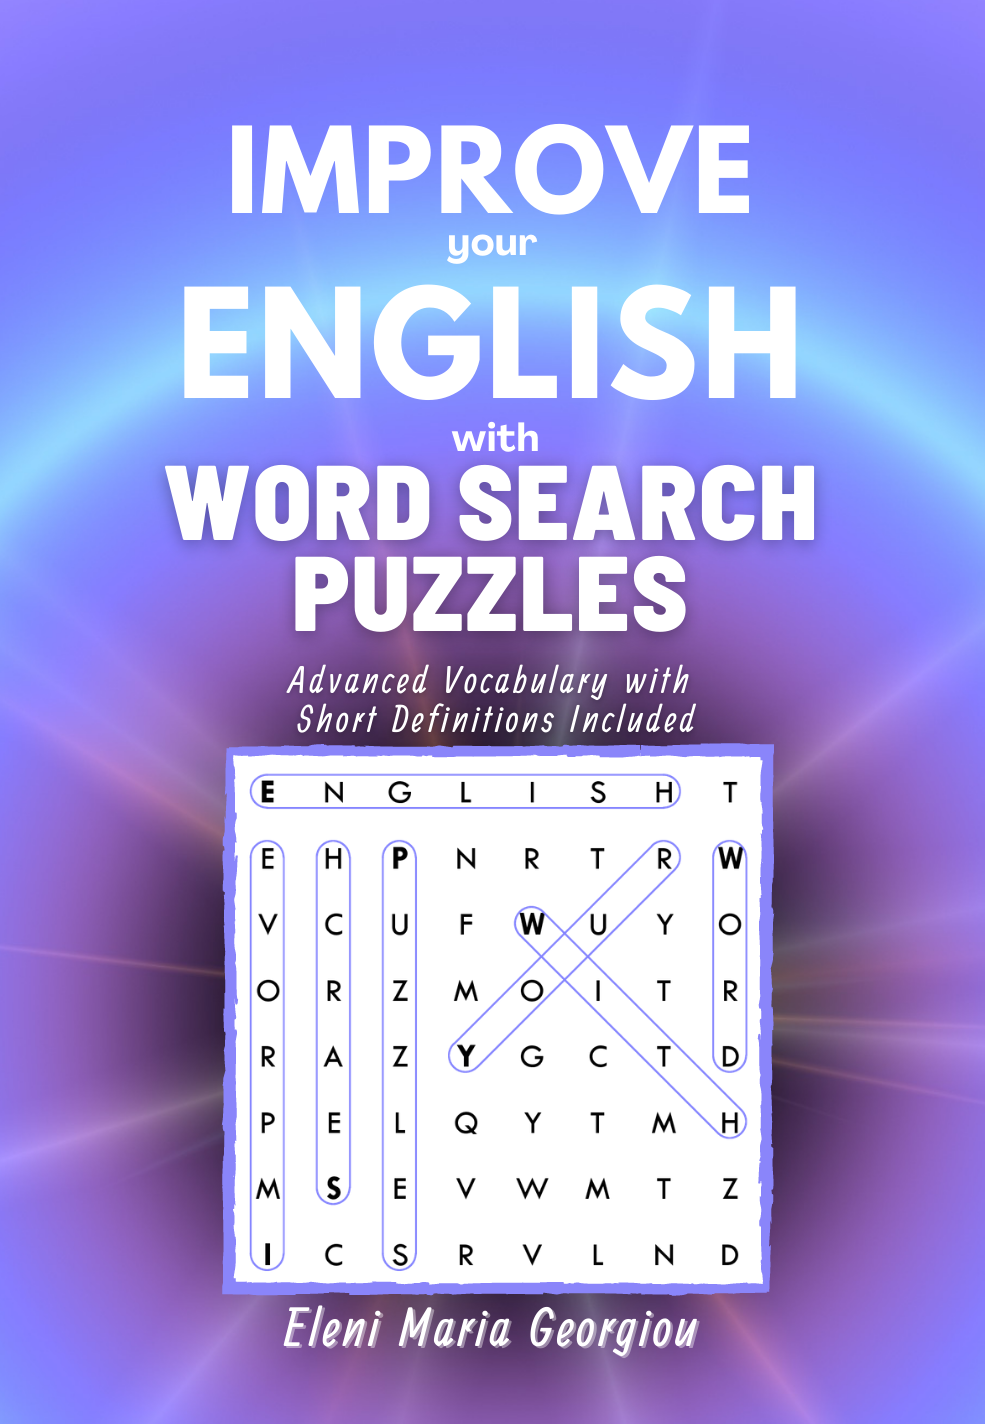 Improve your English with Word Search Puzzles: Advanced Vocabulary